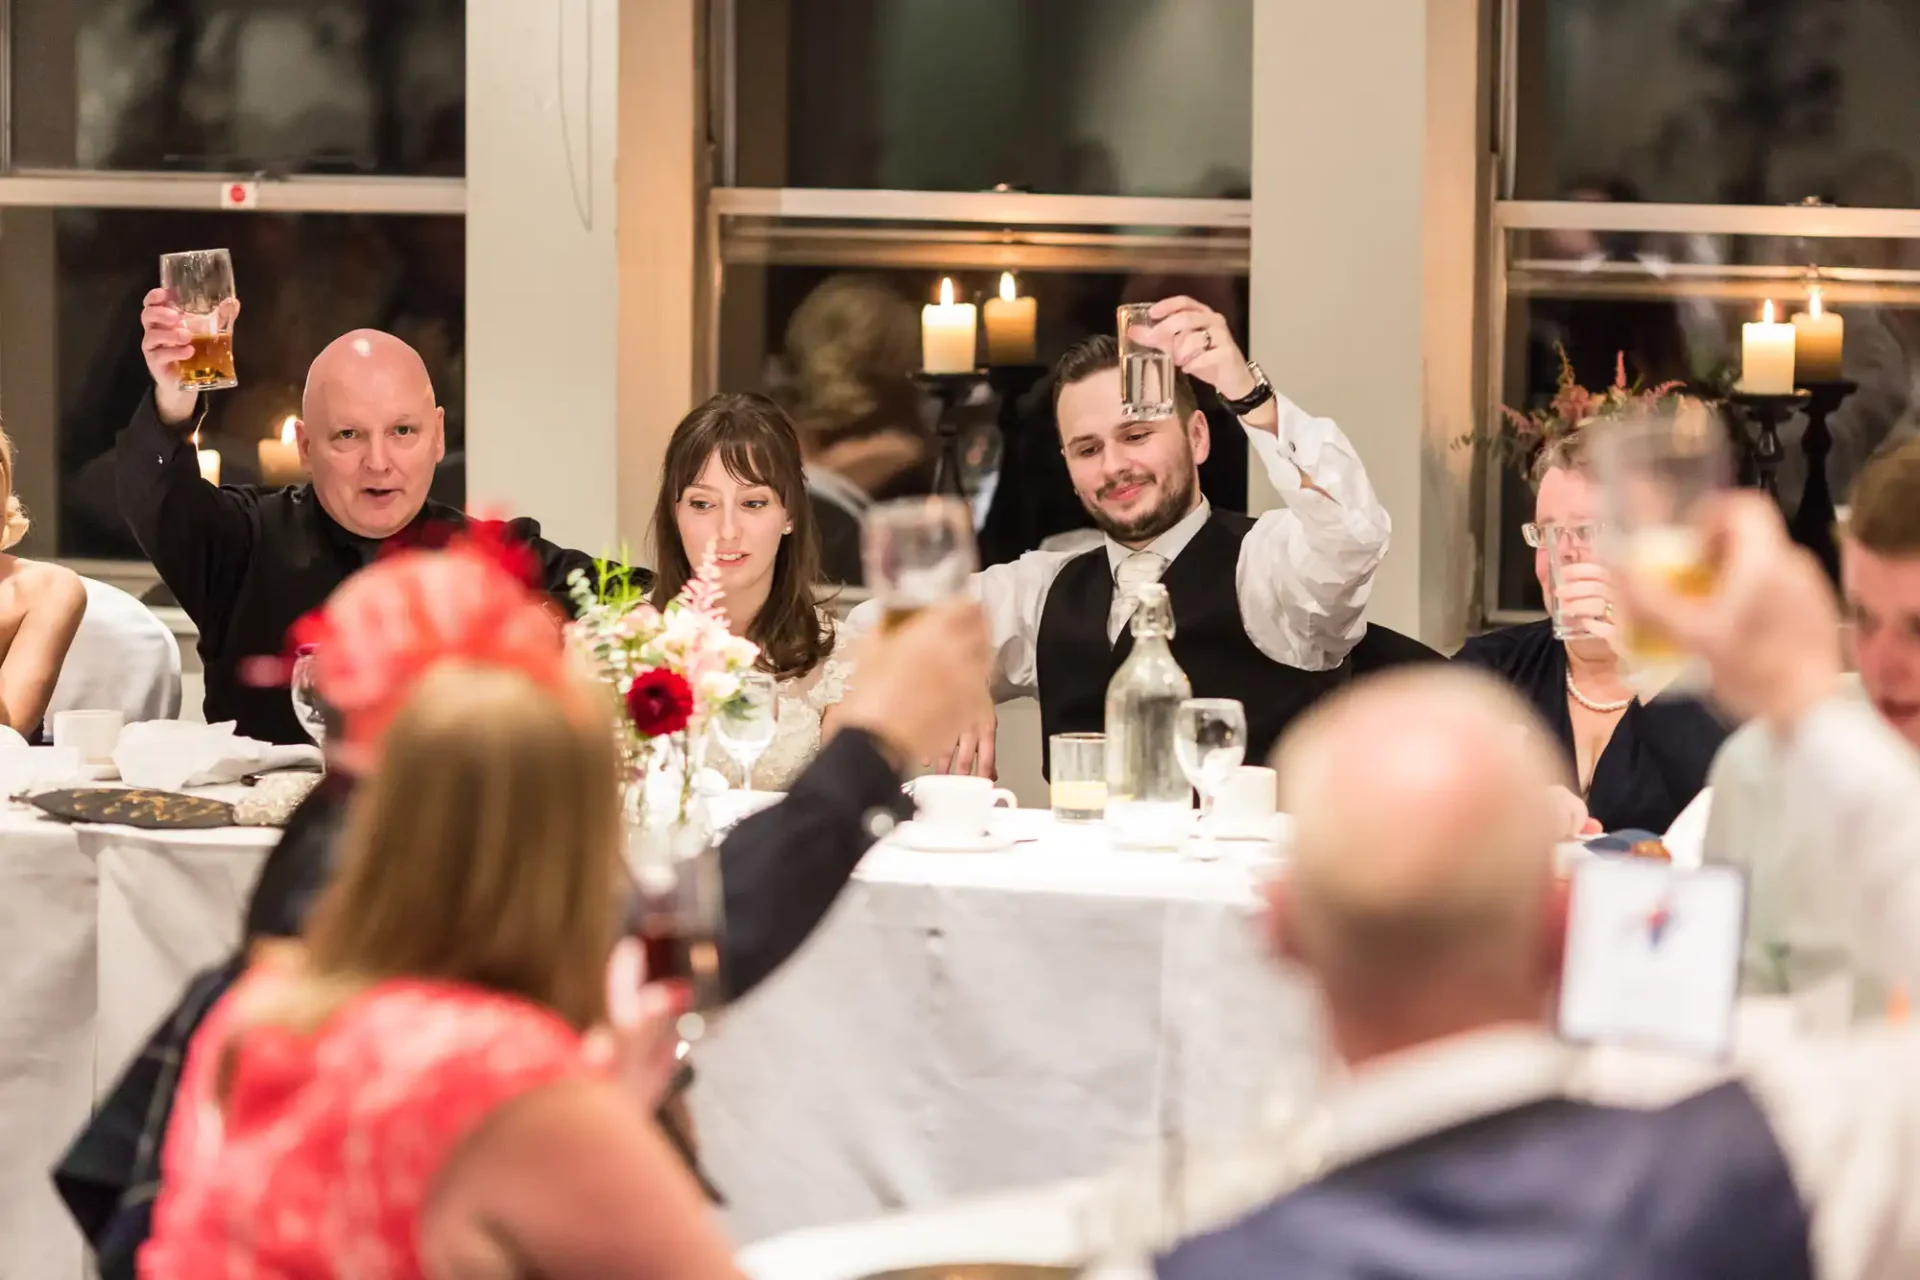 Guests raising their glasses for a toast at a lively banquet hall during a formal event.